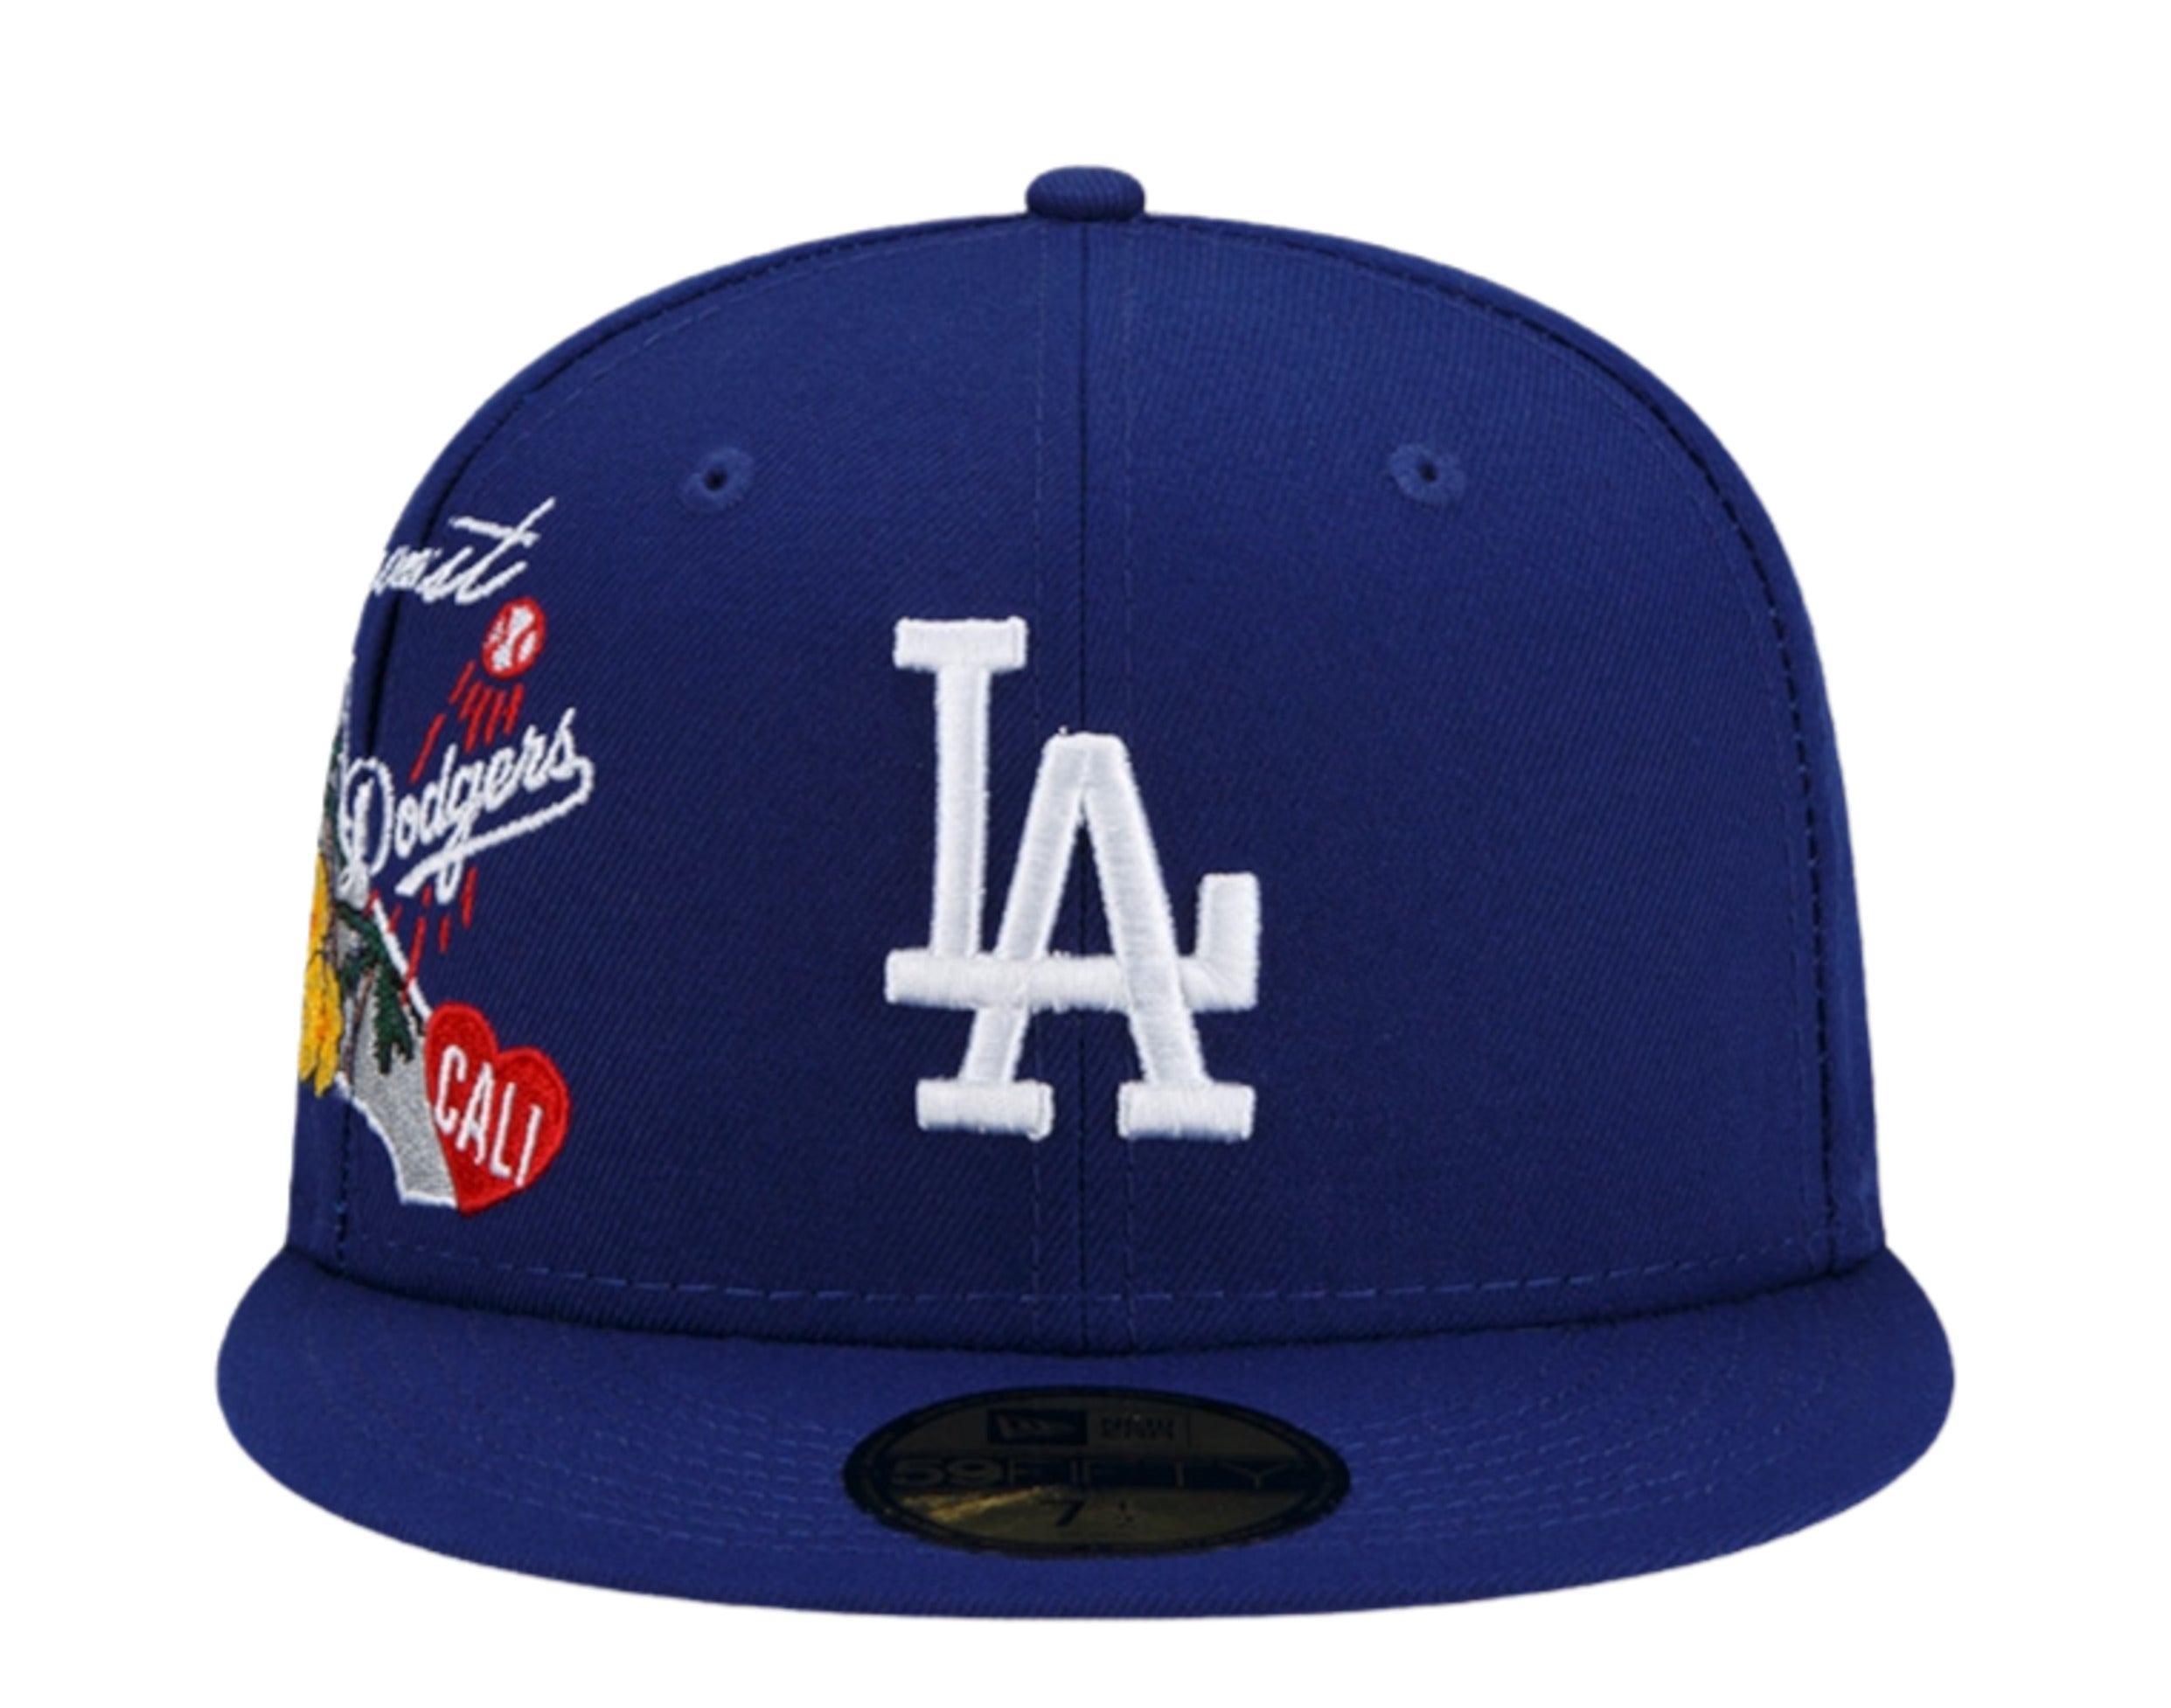  New Era Men's Brooklyn Dodgers Cooperstown Classic Heather Gray  & Royal Blue Hat 59Fifty Fitted Hat Cap (as1, Numeric,  Numeric_6_and_7_eighths) : Sports & Outdoors